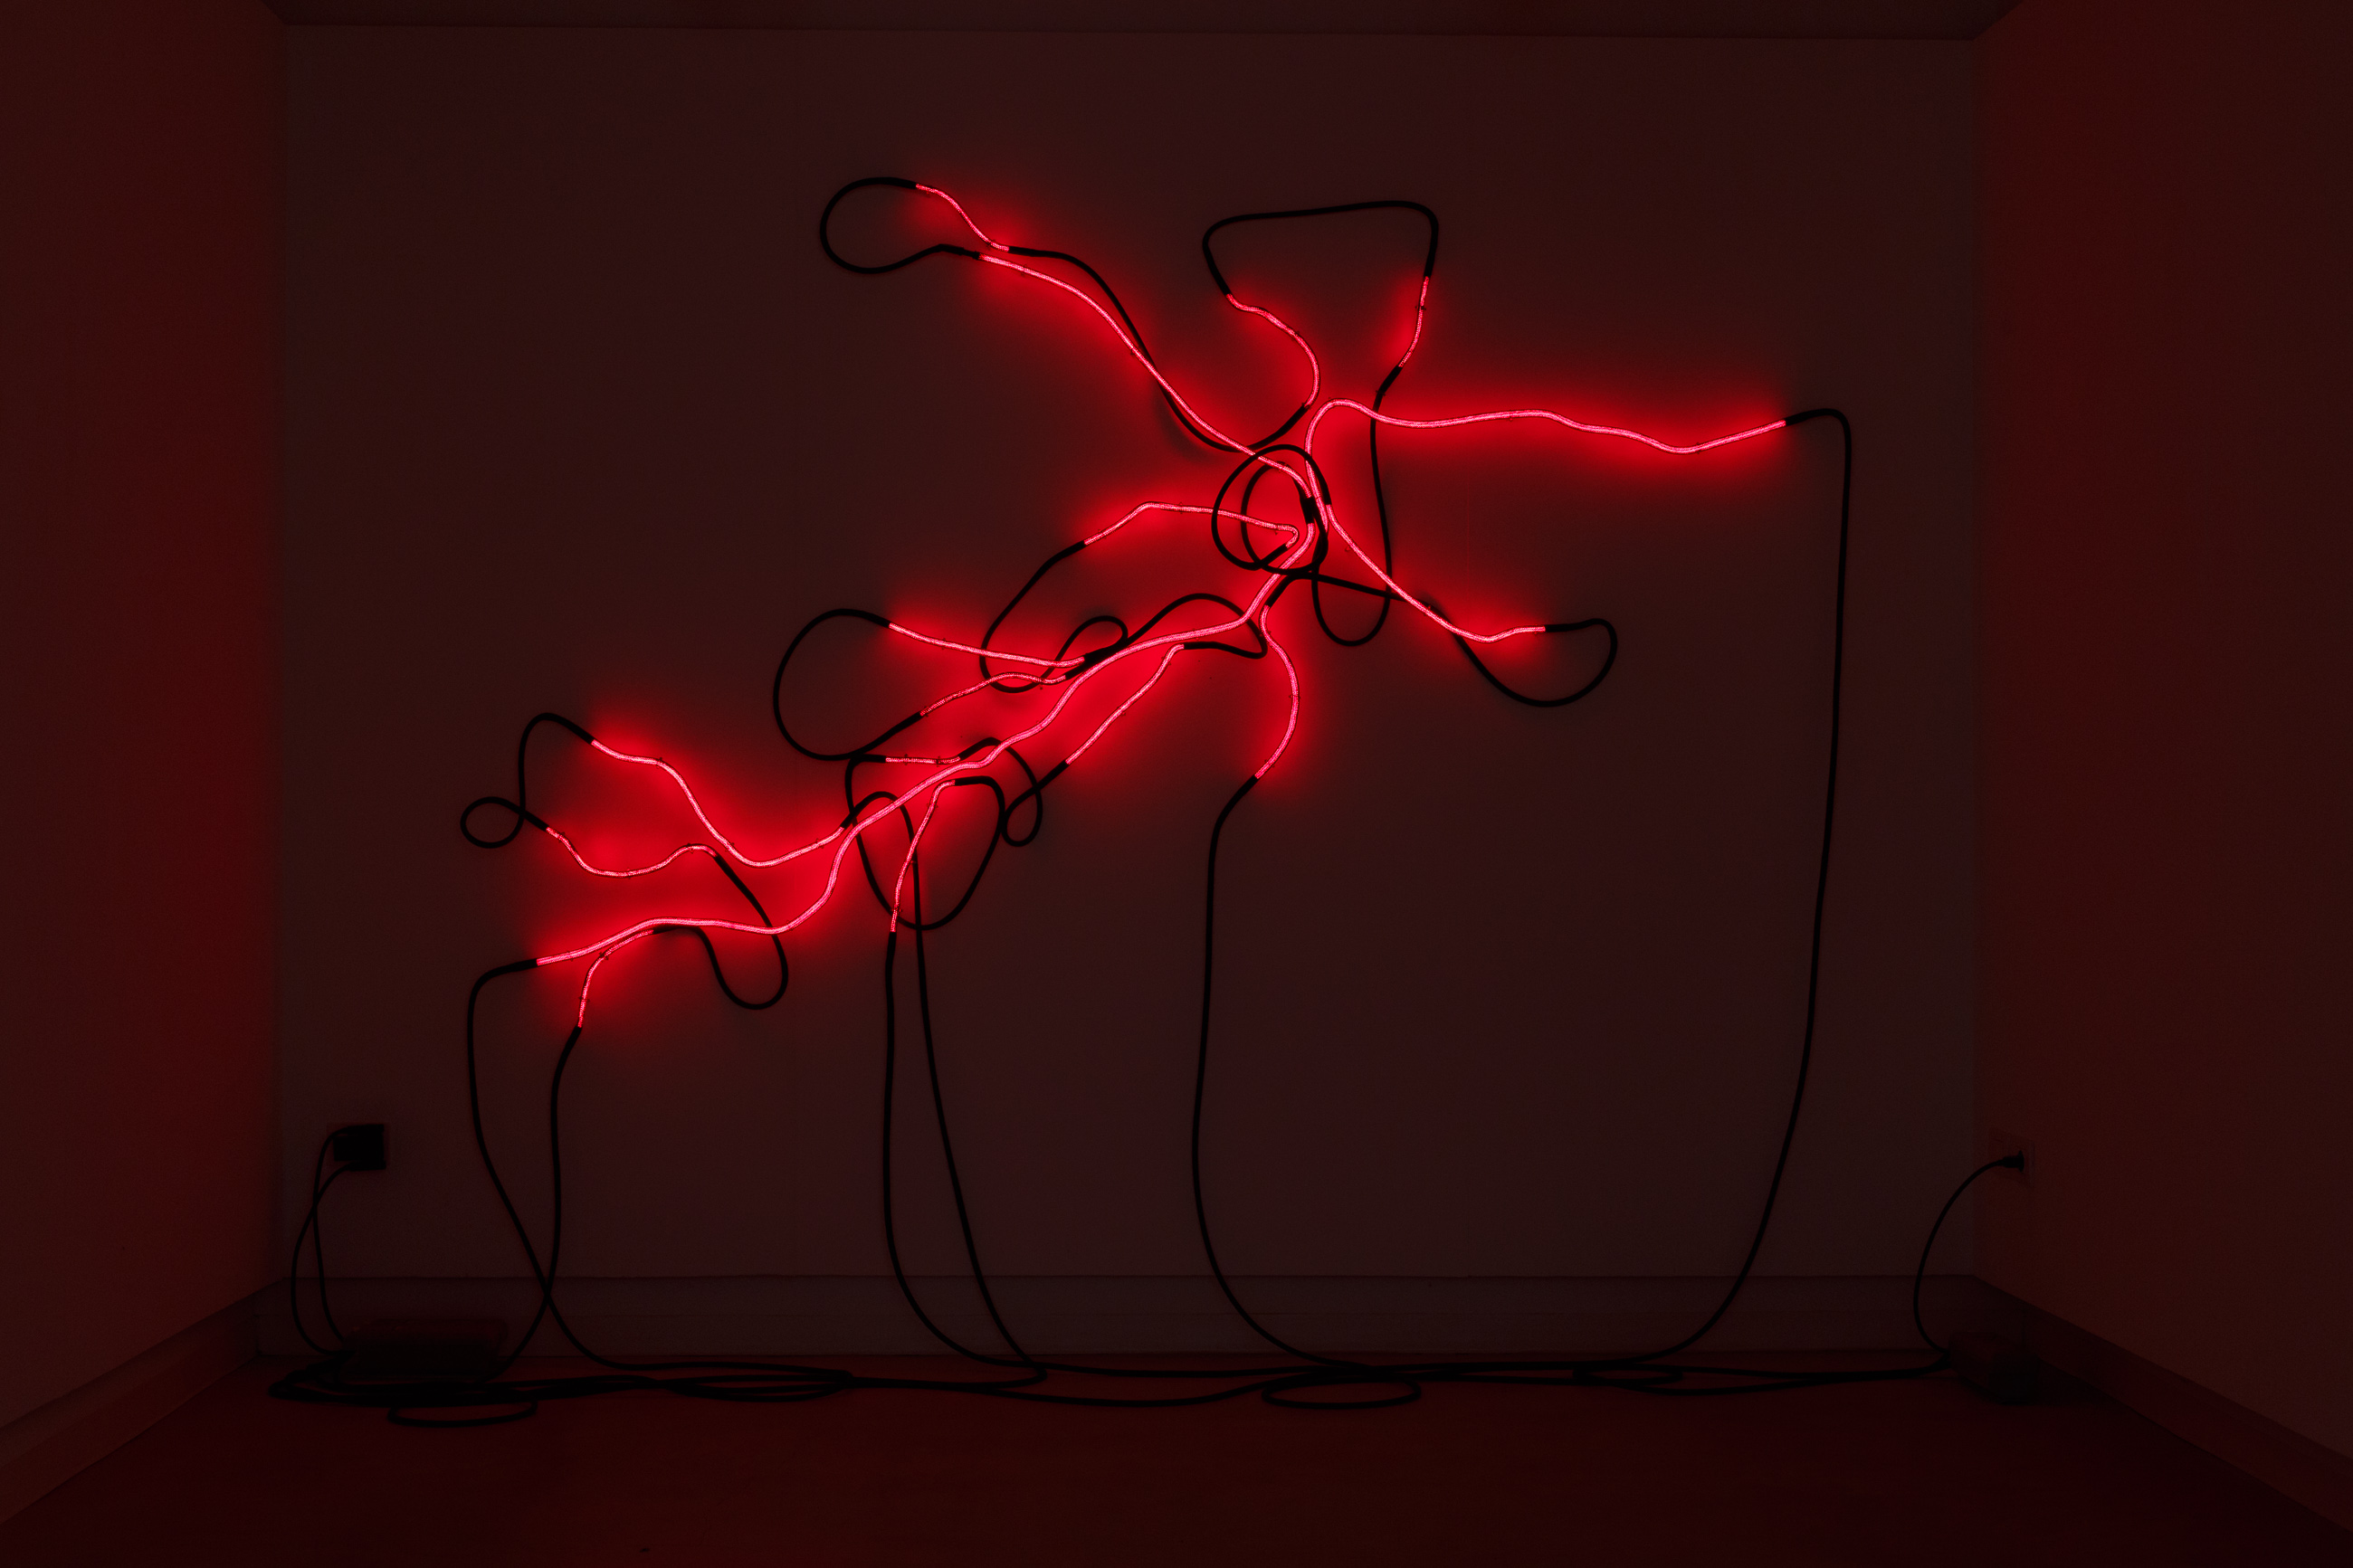 Installation view of Things with endings, by Arthur Duff, Things with endings, 2015, Polyester twist and red neon